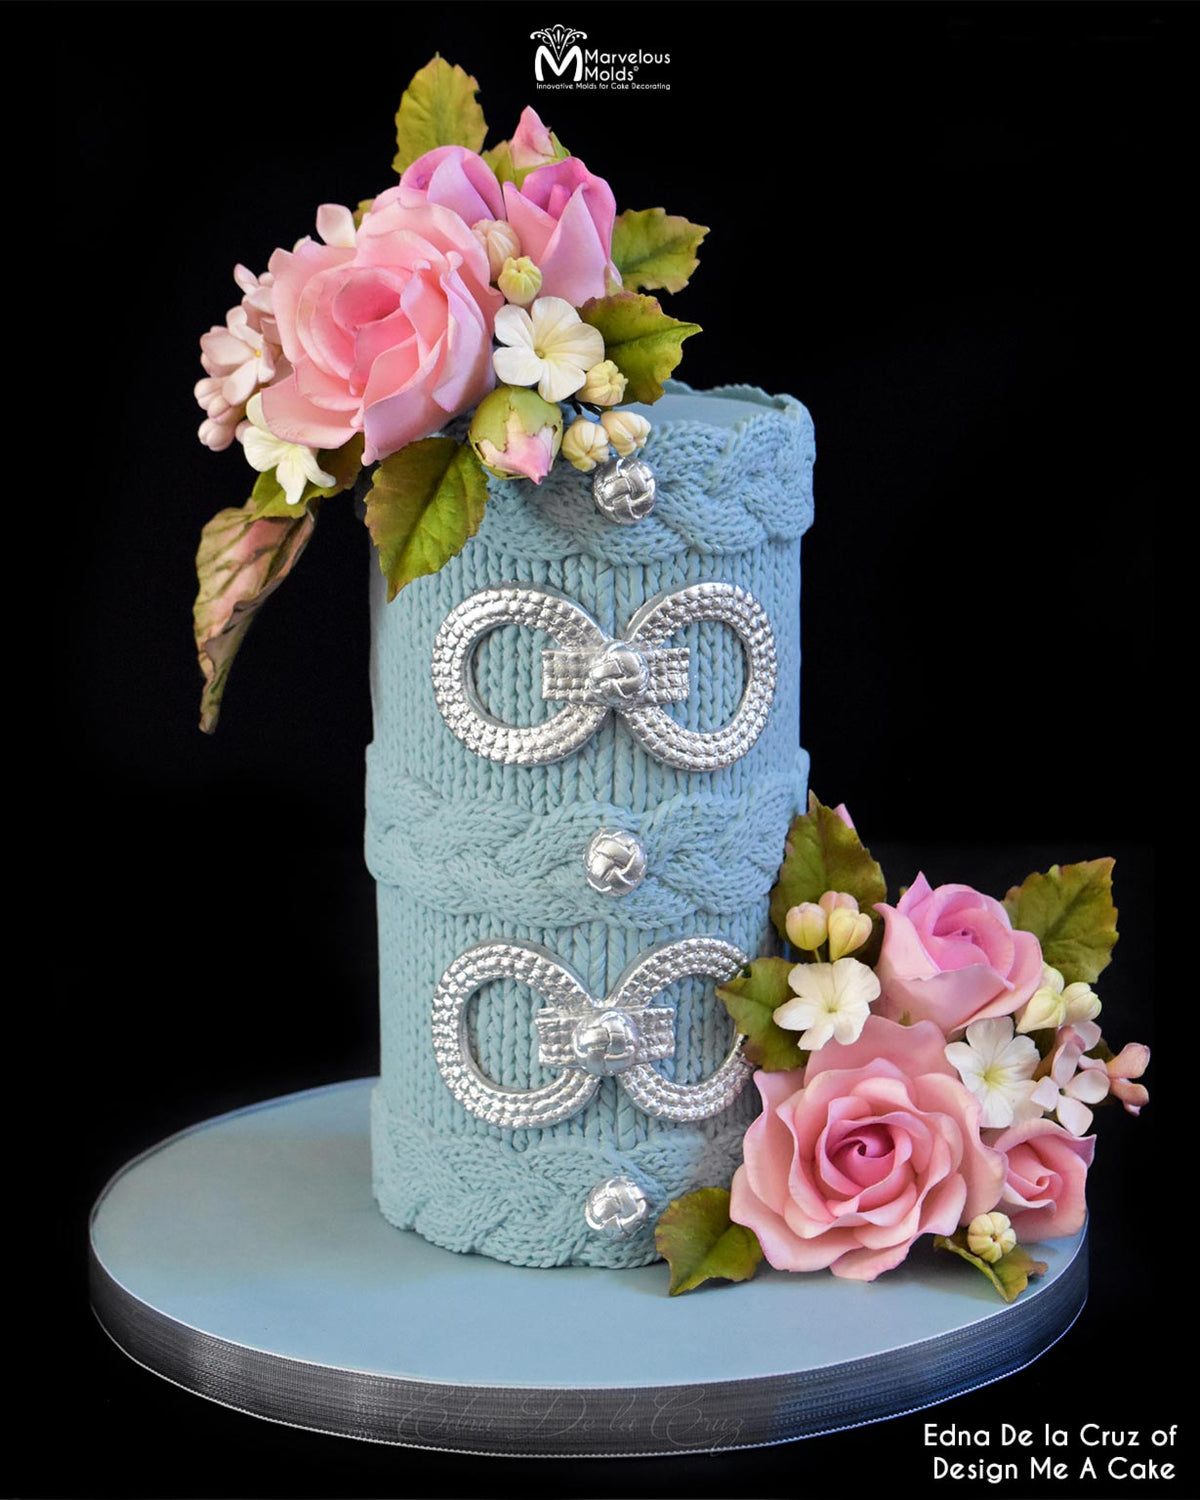 Blue Knit Cake decorated using the Marvelous Molds Classic Knit Simpress